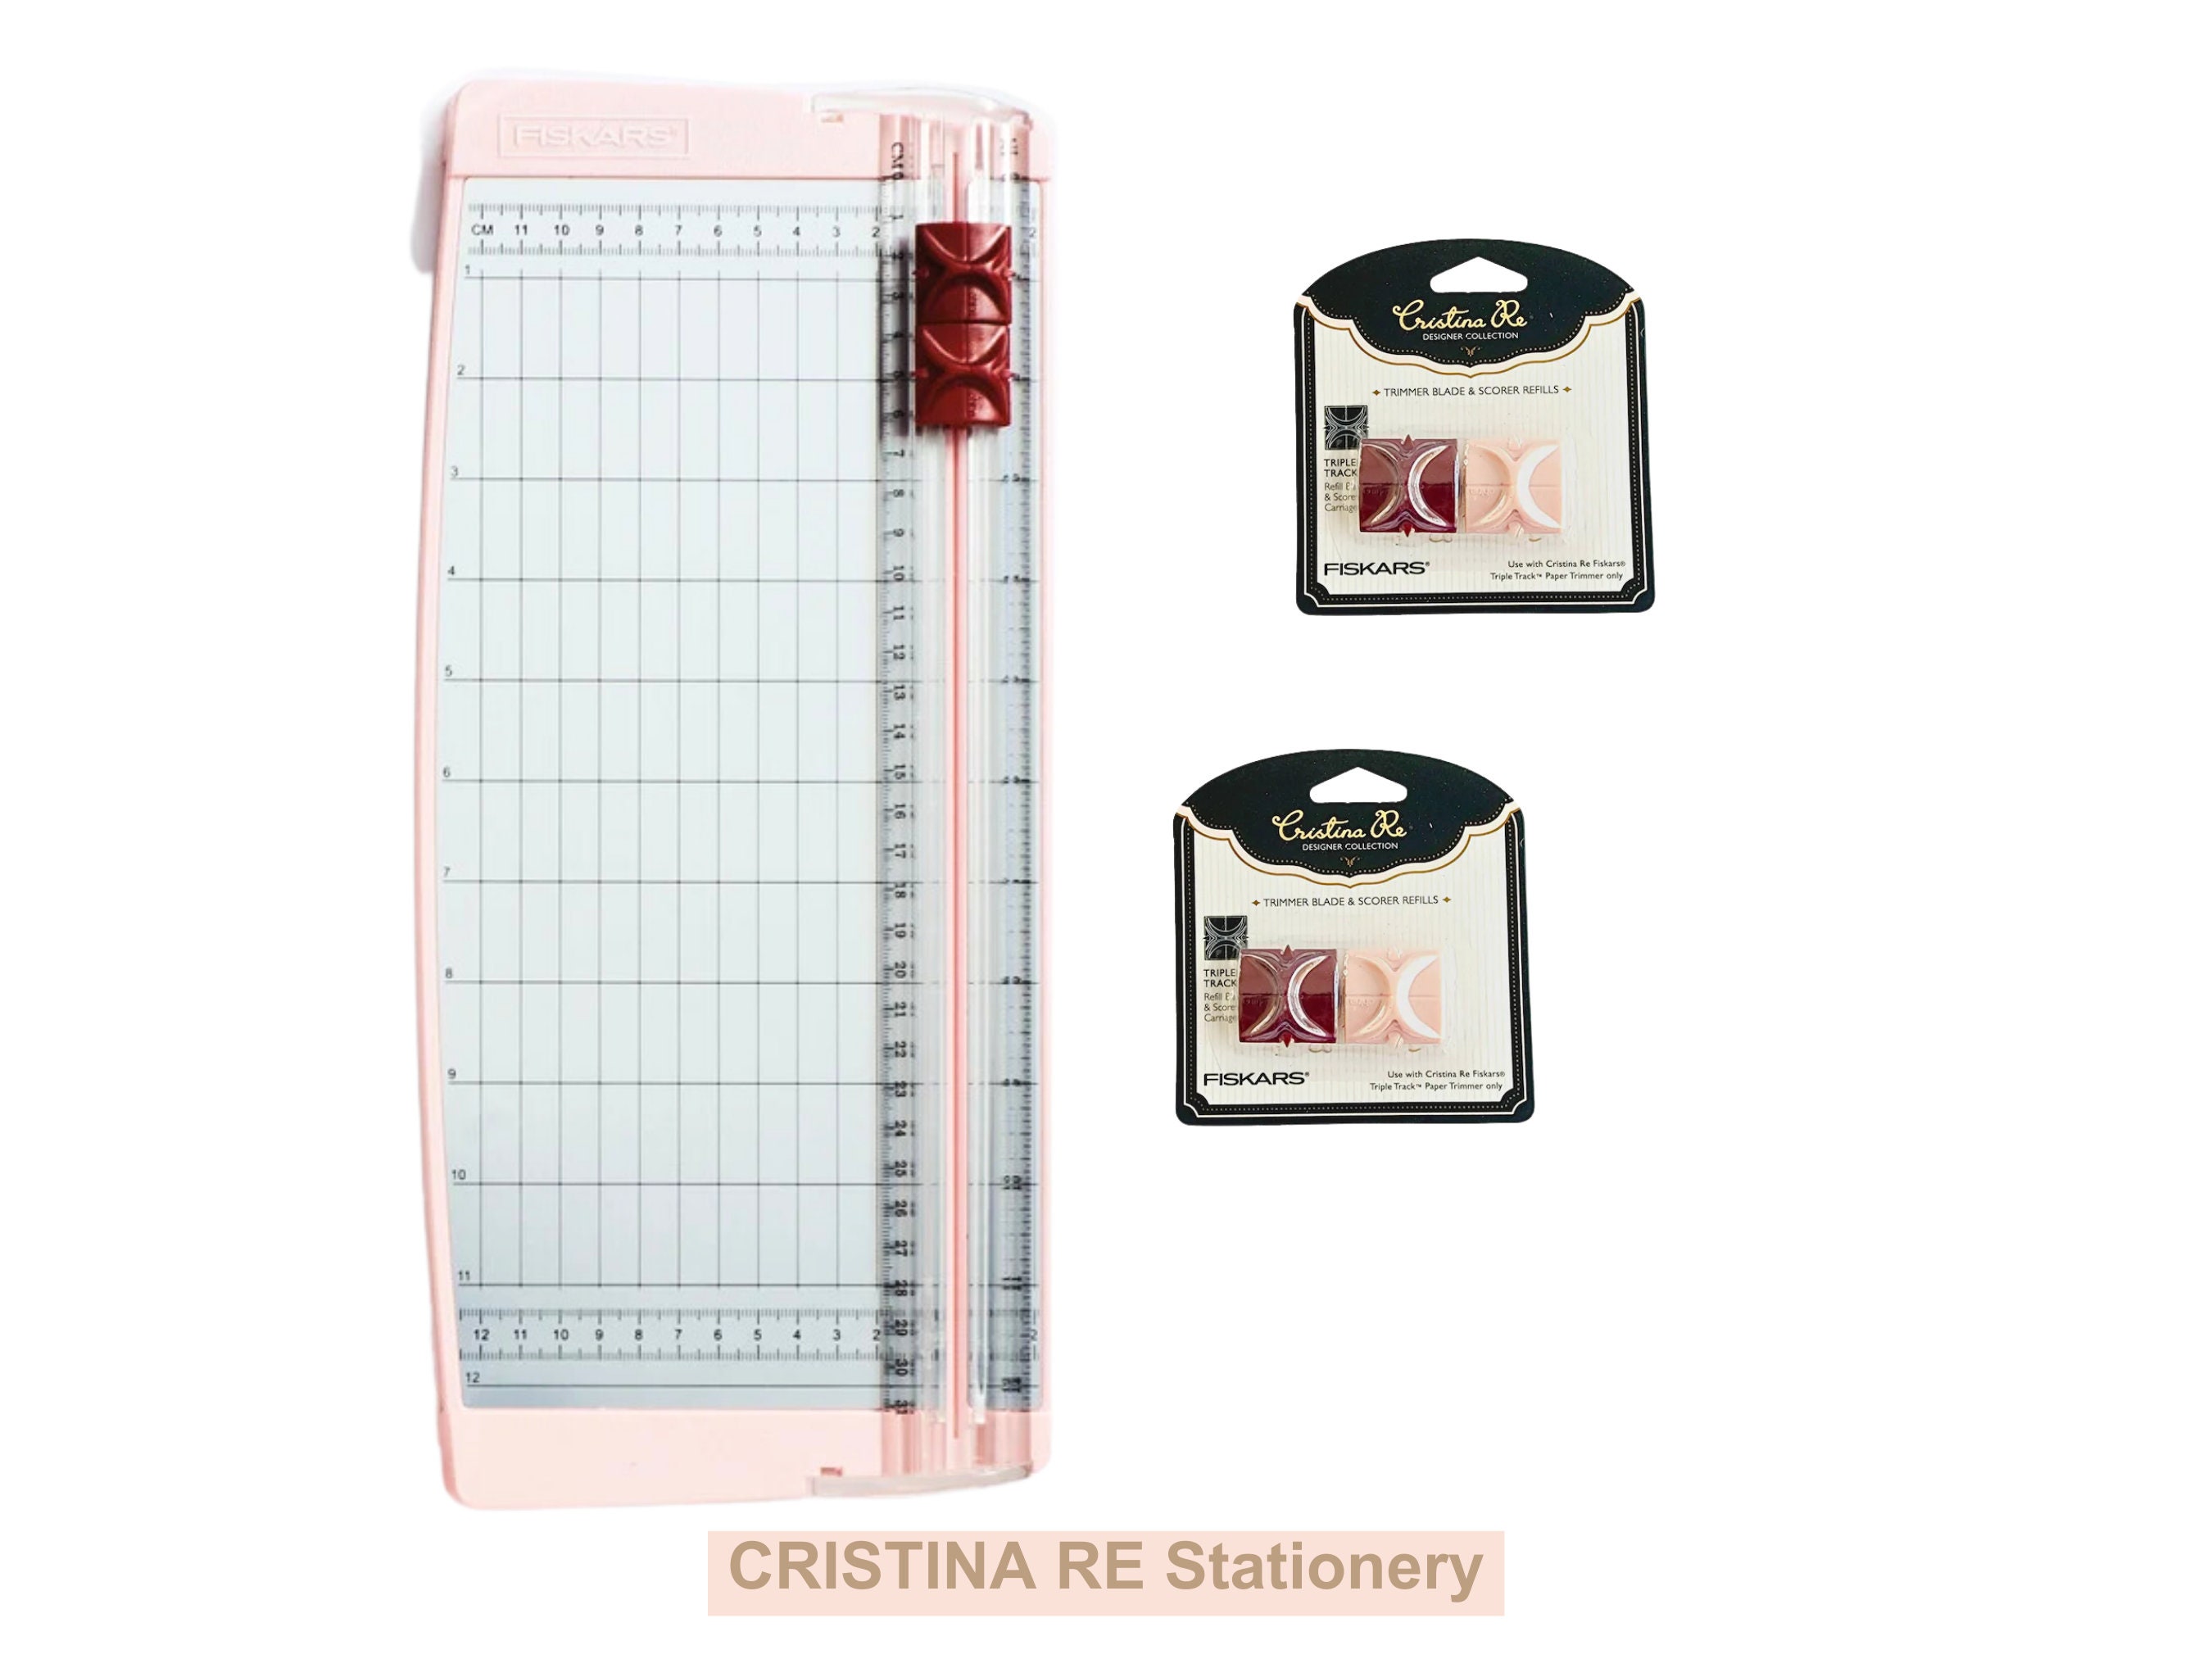  Customer reviews: Tim Holtz Paper Cutter Tool - Maxi Guillotine  Paper Trimmer for Scrapbooking, Vinyl, and Craft Paper - 12.25 Inch Cutting  Length with Extendable Ruler and Grid Lines